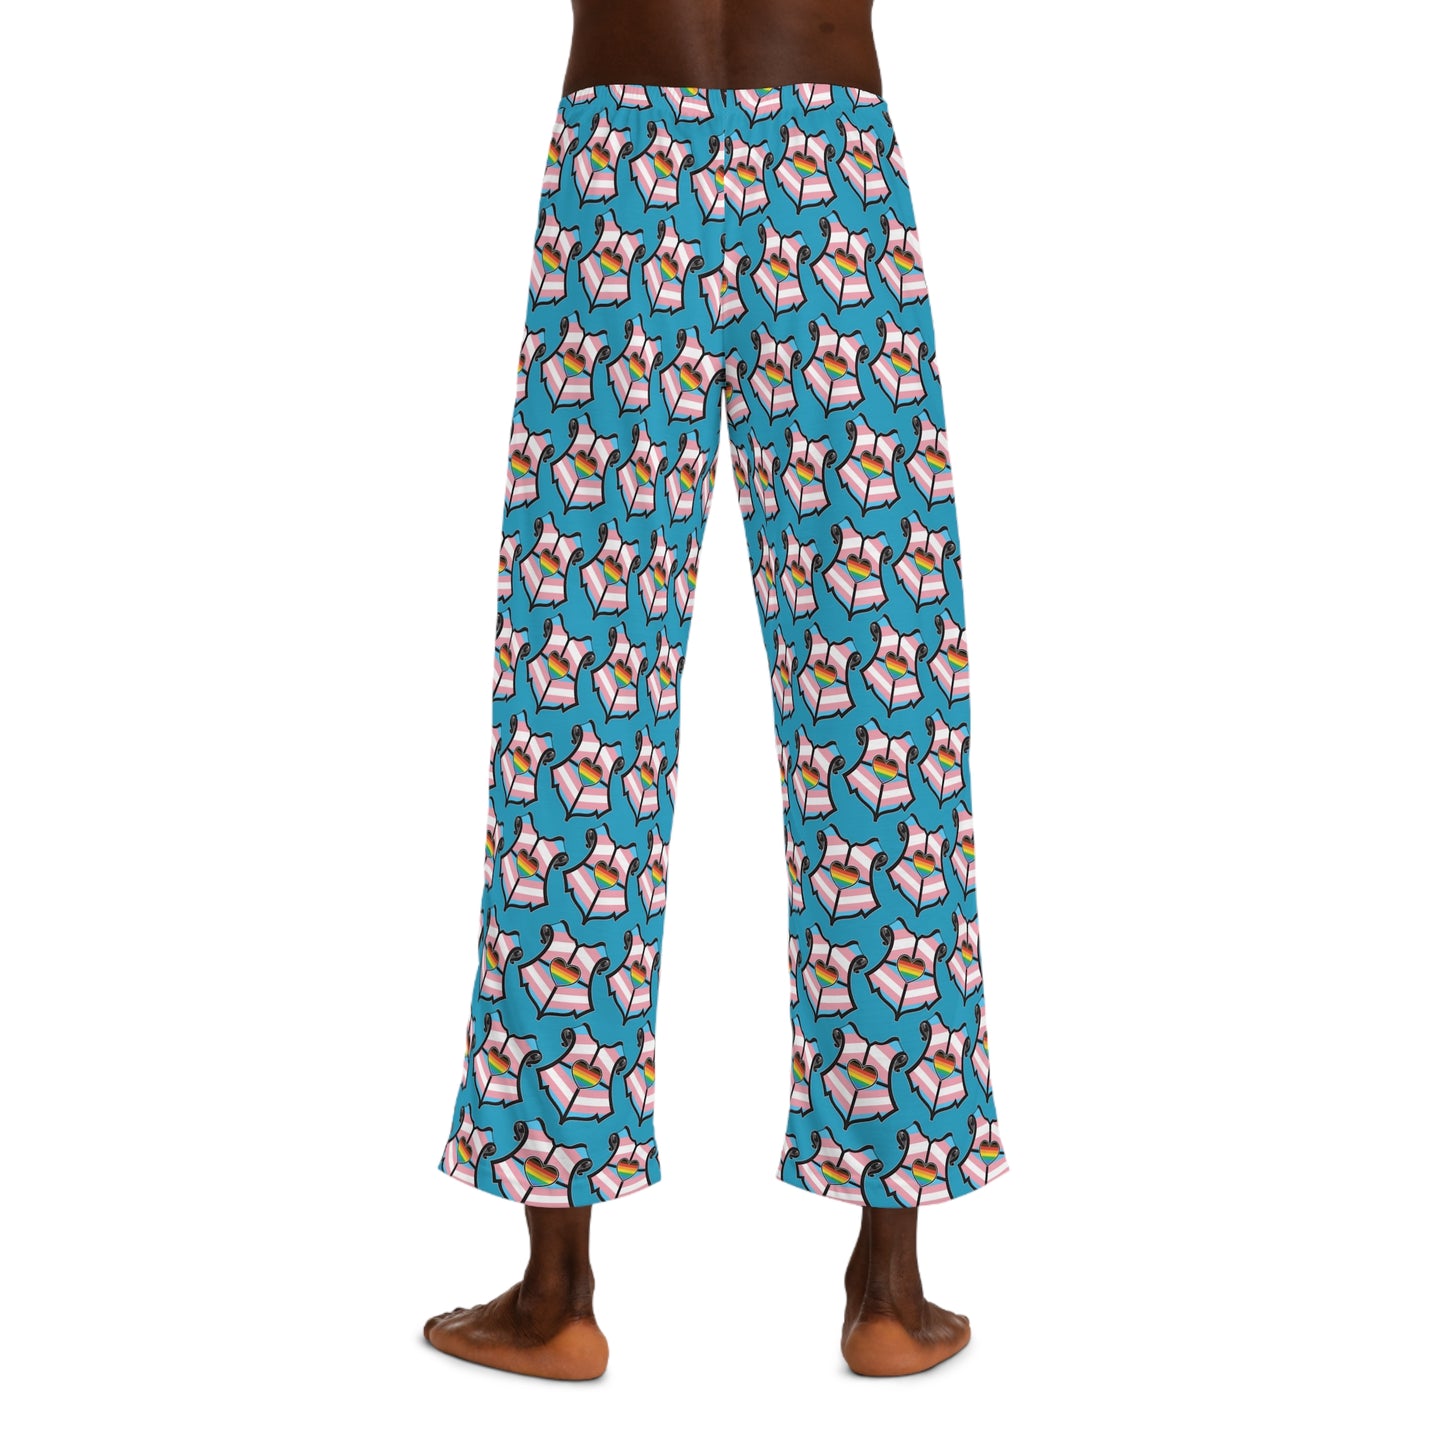 Wizards for Trans Rights Pajama Pants - Unisex Fit